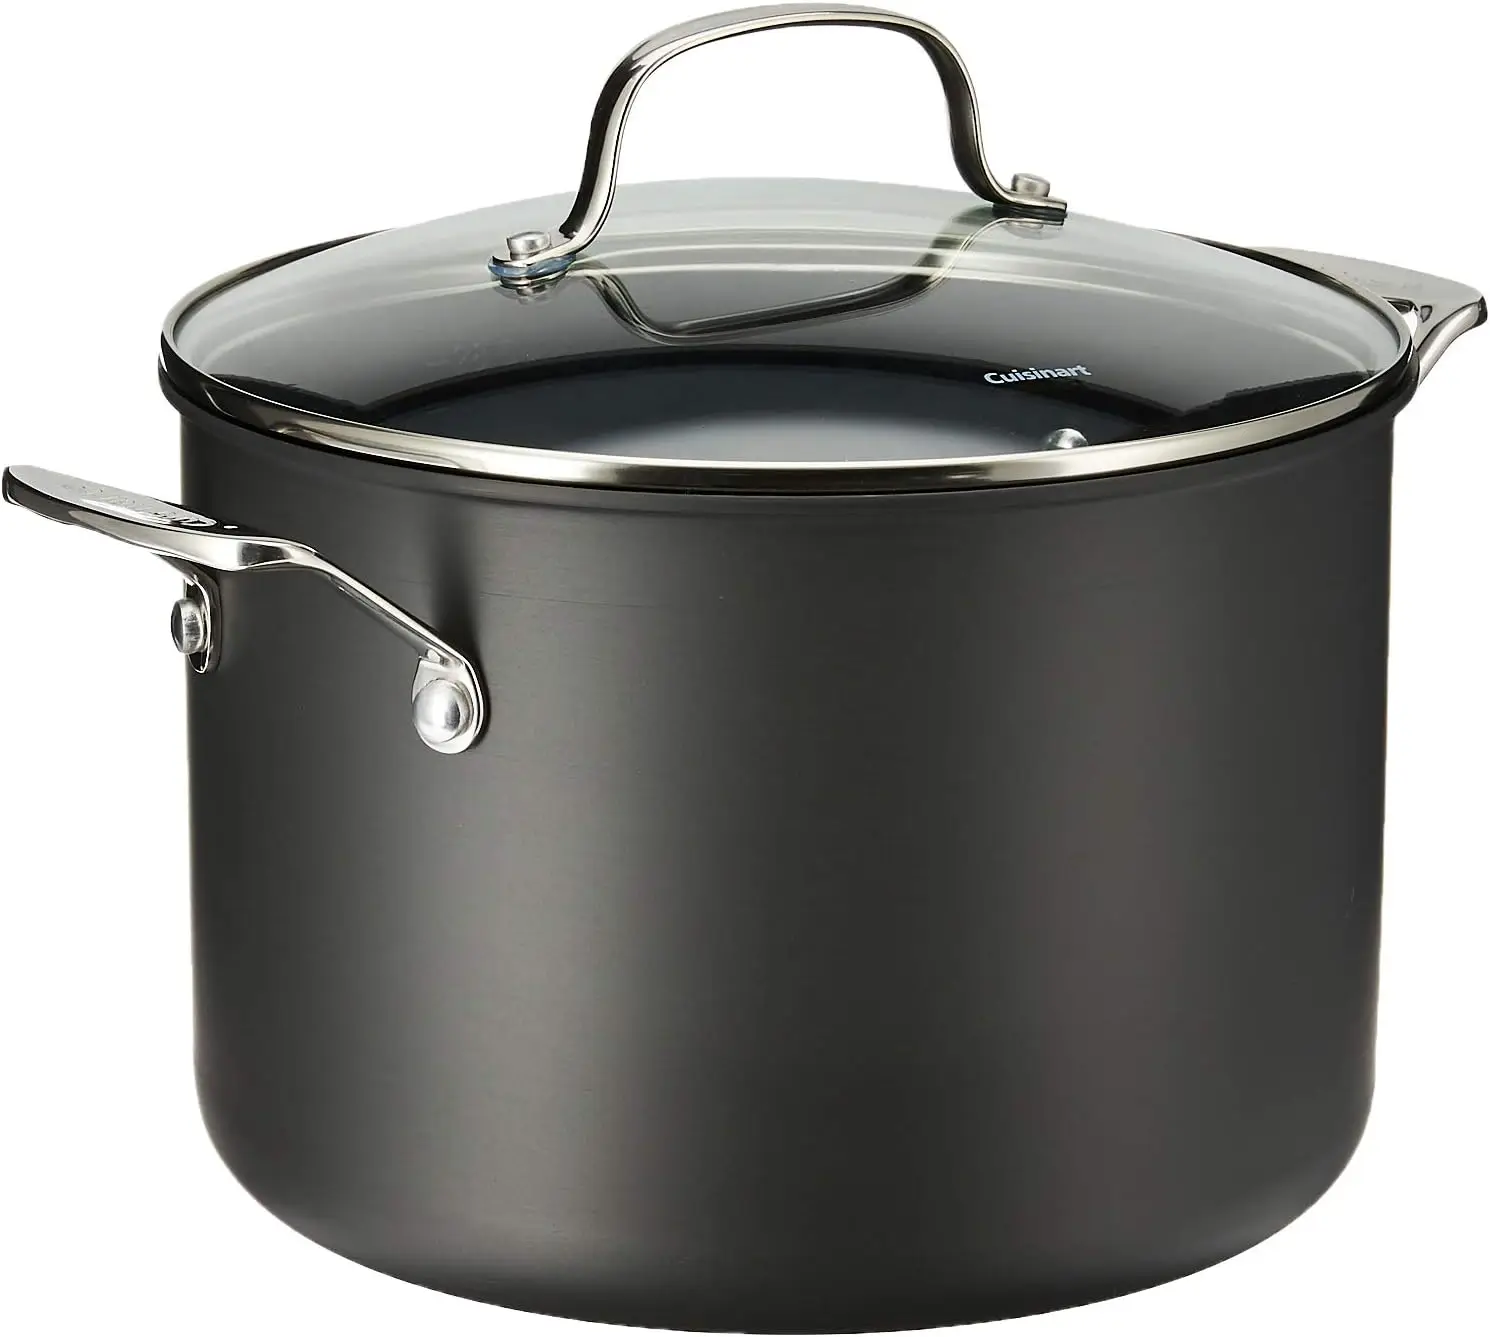 

Classic Nonstick Hard-Anodized 8-Quart Stockpot with Lid,Black Plate for cooking Accesorios freidora Molde para hornear Round ca